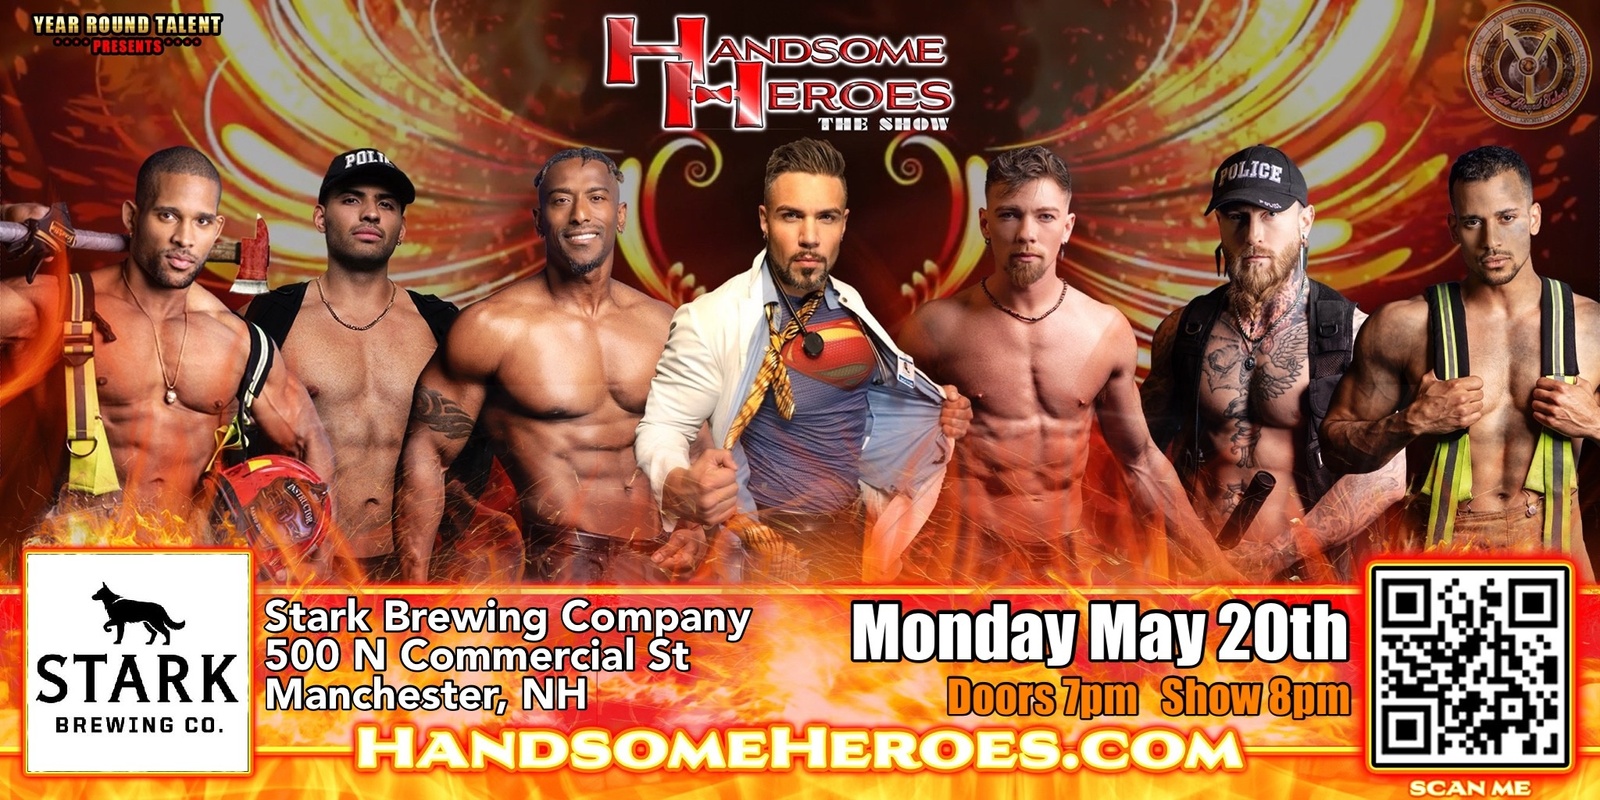 Banner image for Manchester, NH - Handsome Heroes: The Show "The Best Ladies' Night of All Time!!"